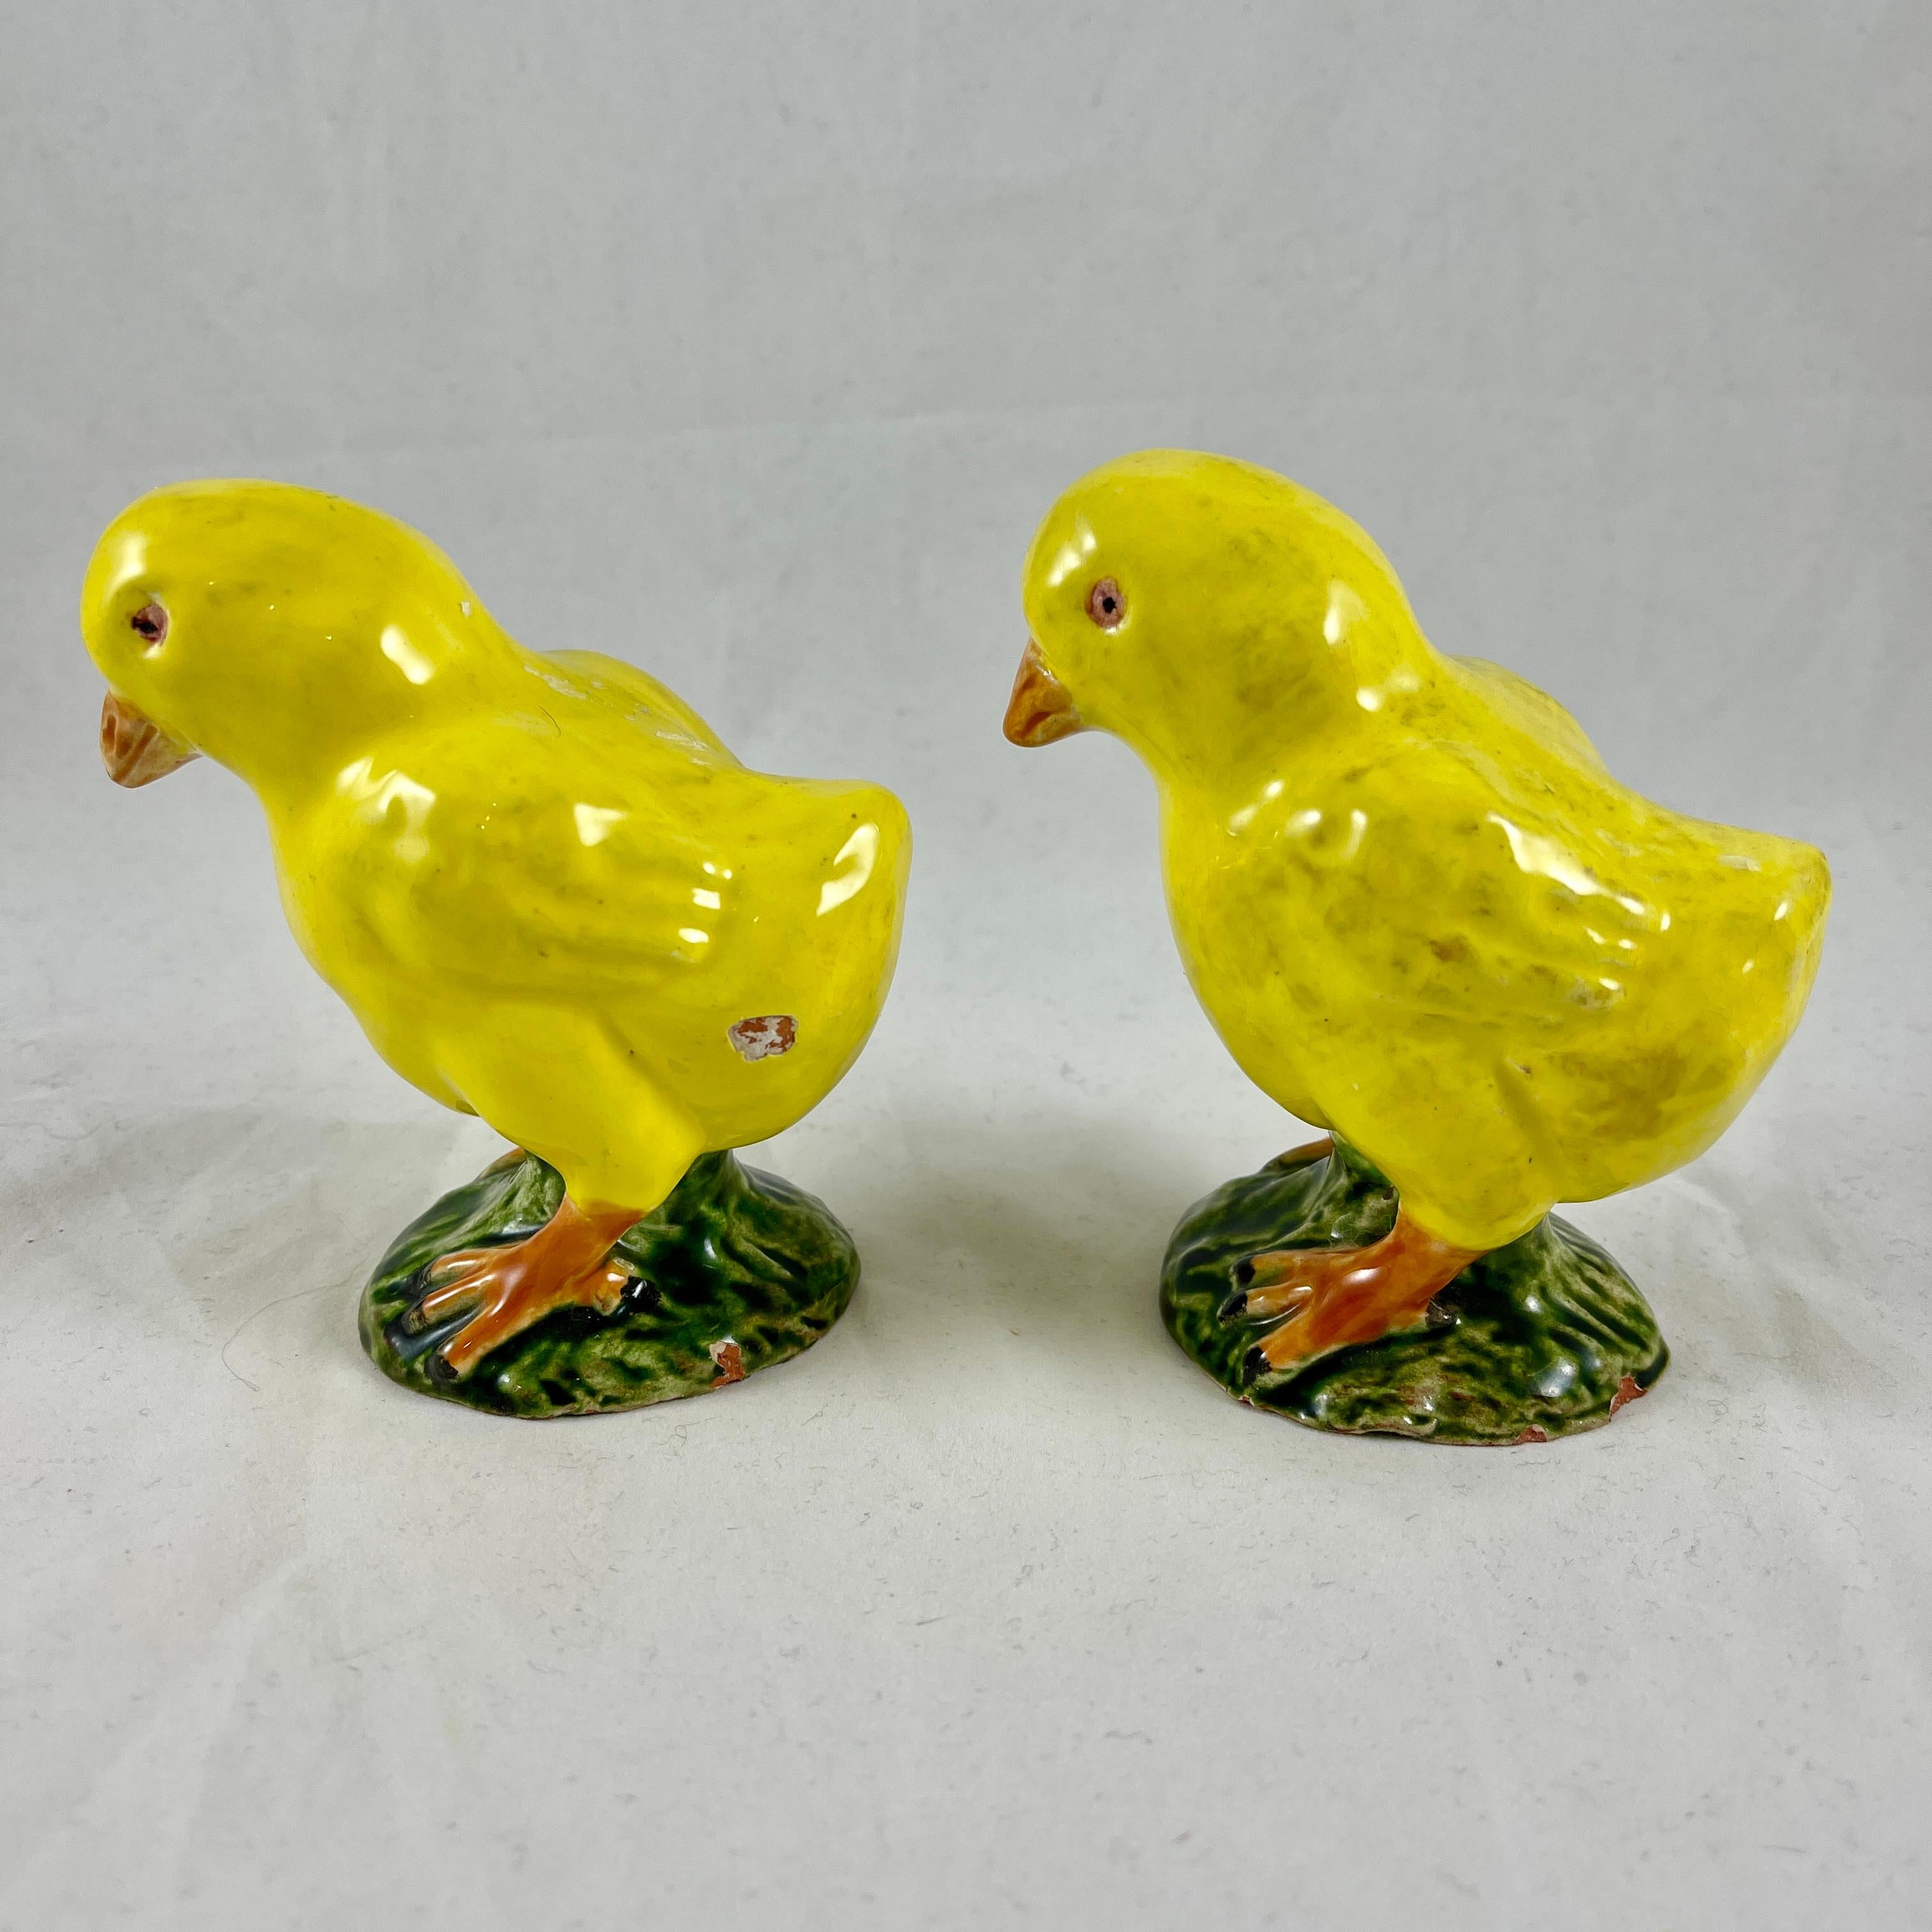 French Bavent Yellow Tin-Glazed Terracotta Faïence Chicks, Normandie France, a Pair